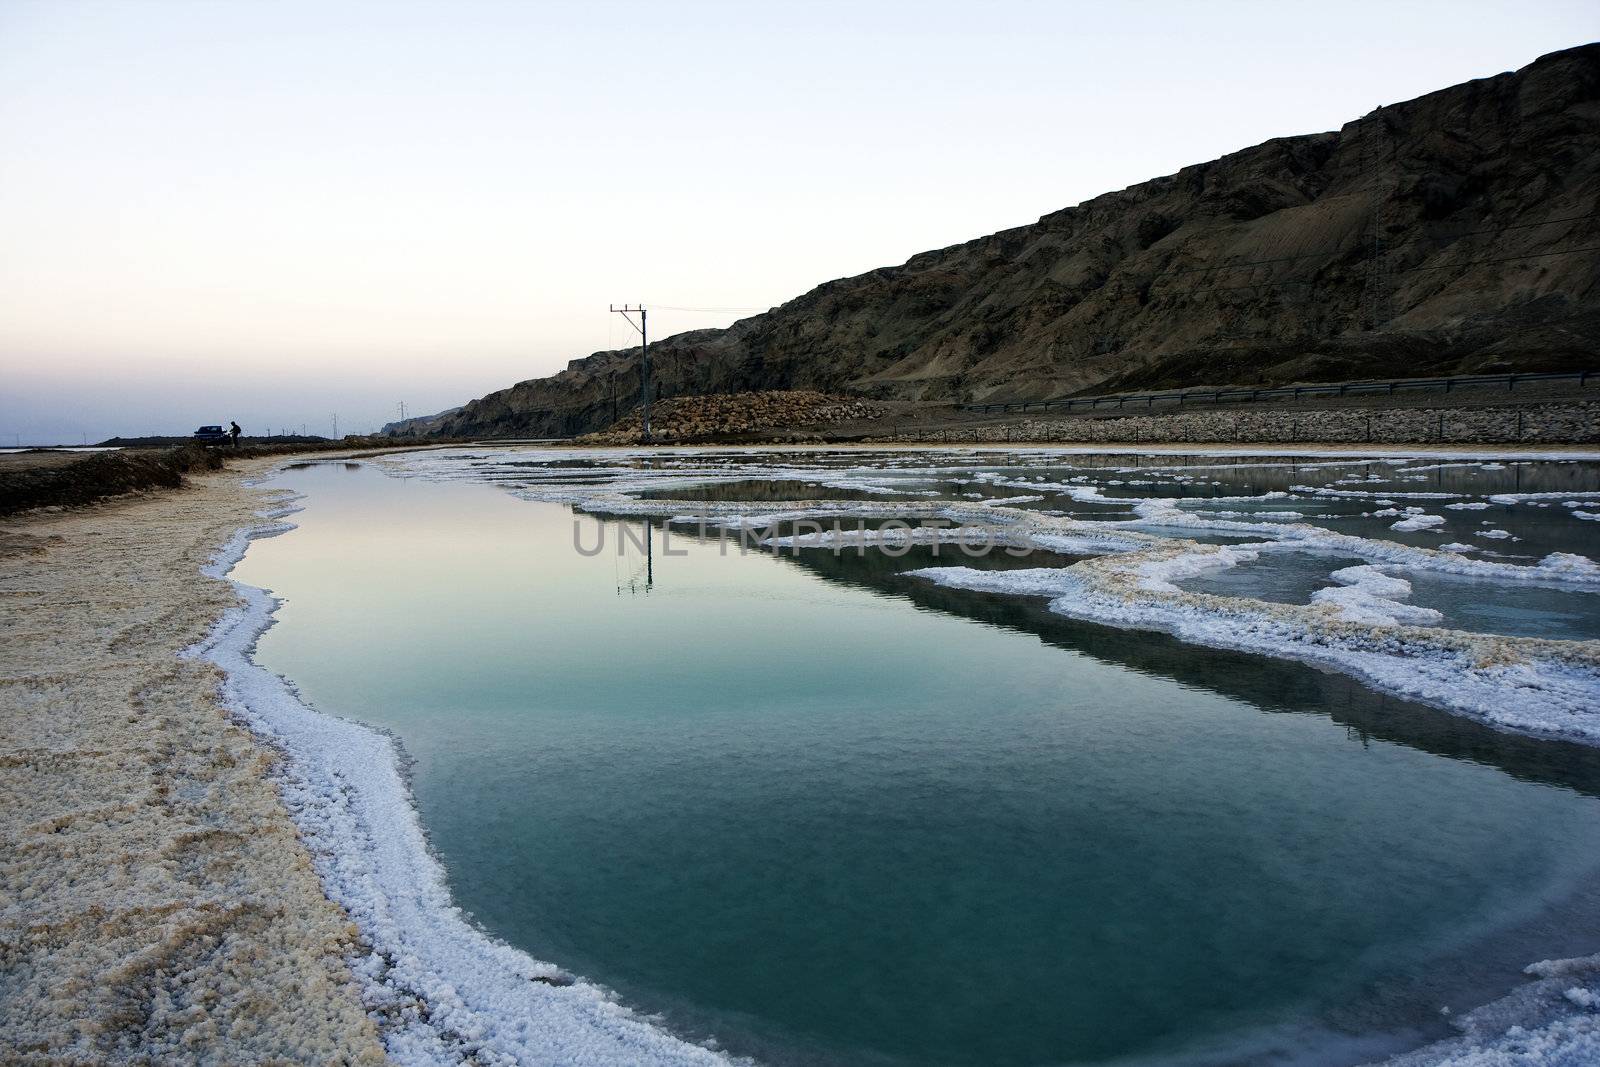 The water of the dead sea with salty paths at sunset